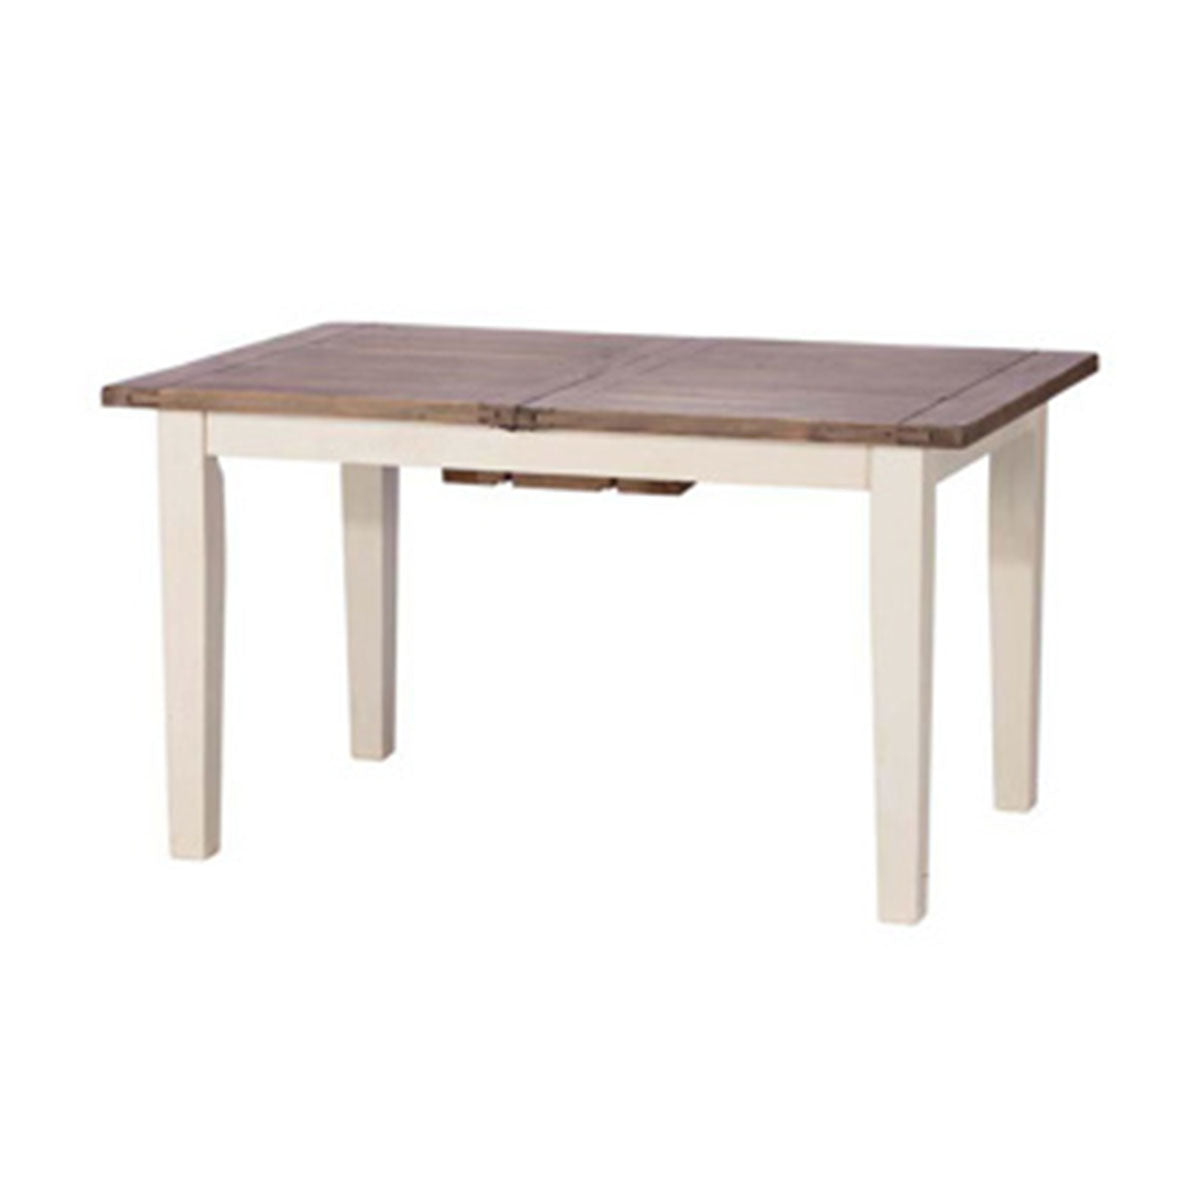 Cotswold Extending Dining Table